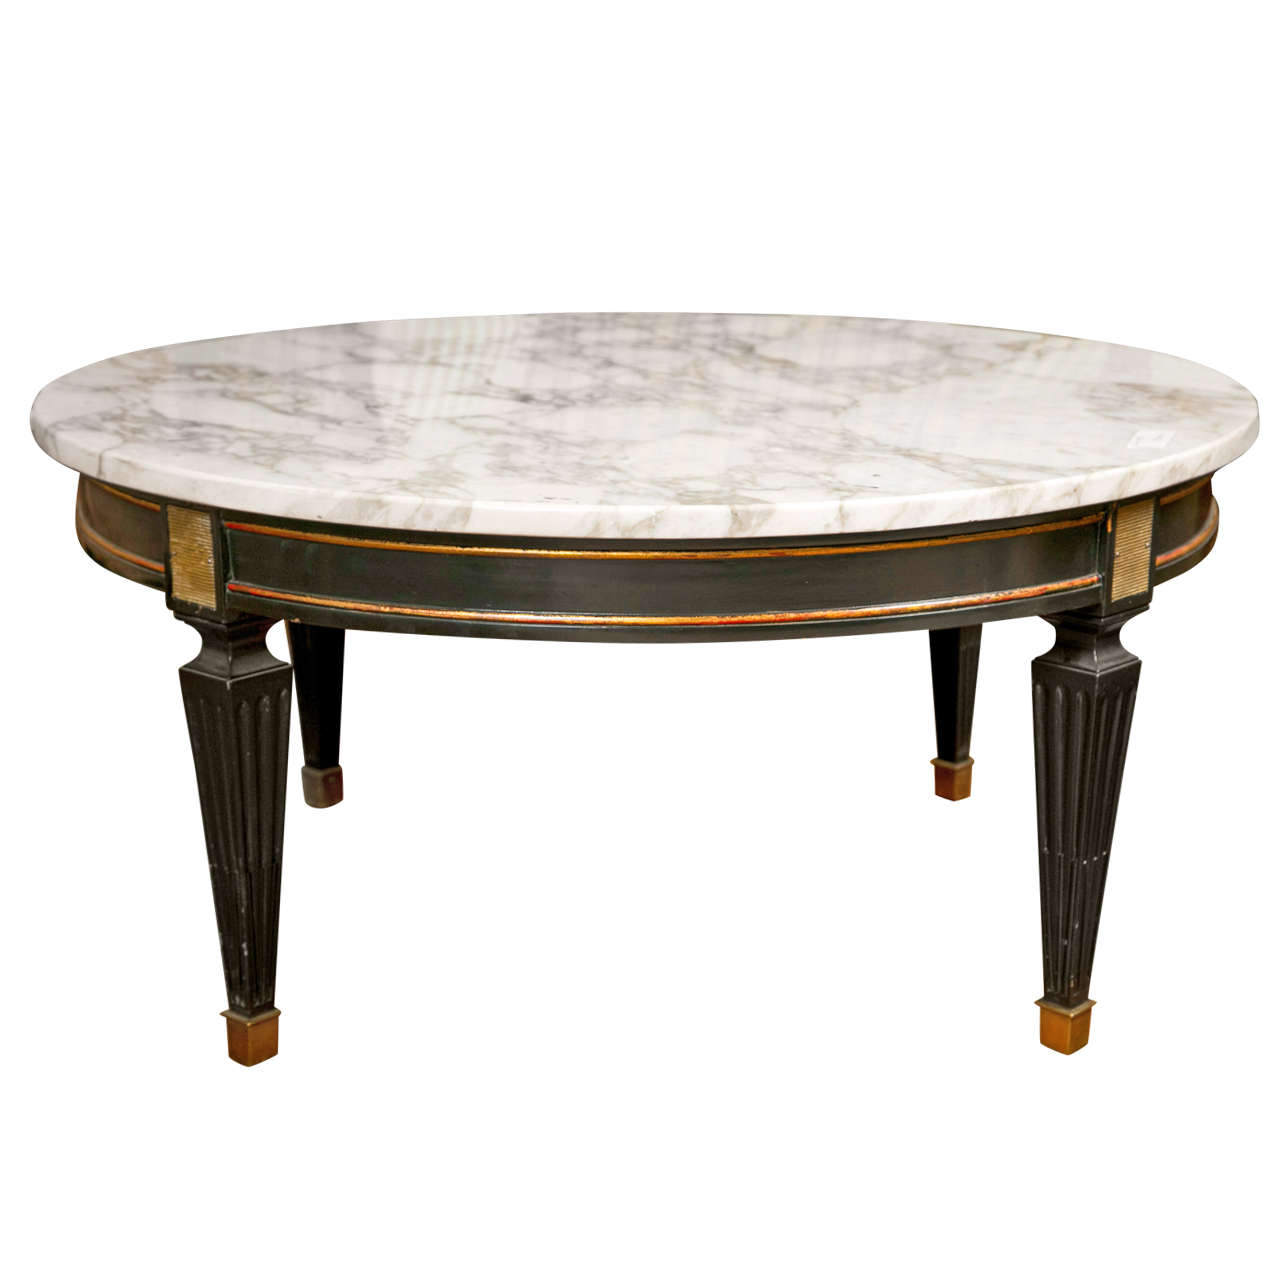 French Directoire Style Circular Coffee Table With Thick White Marble Top